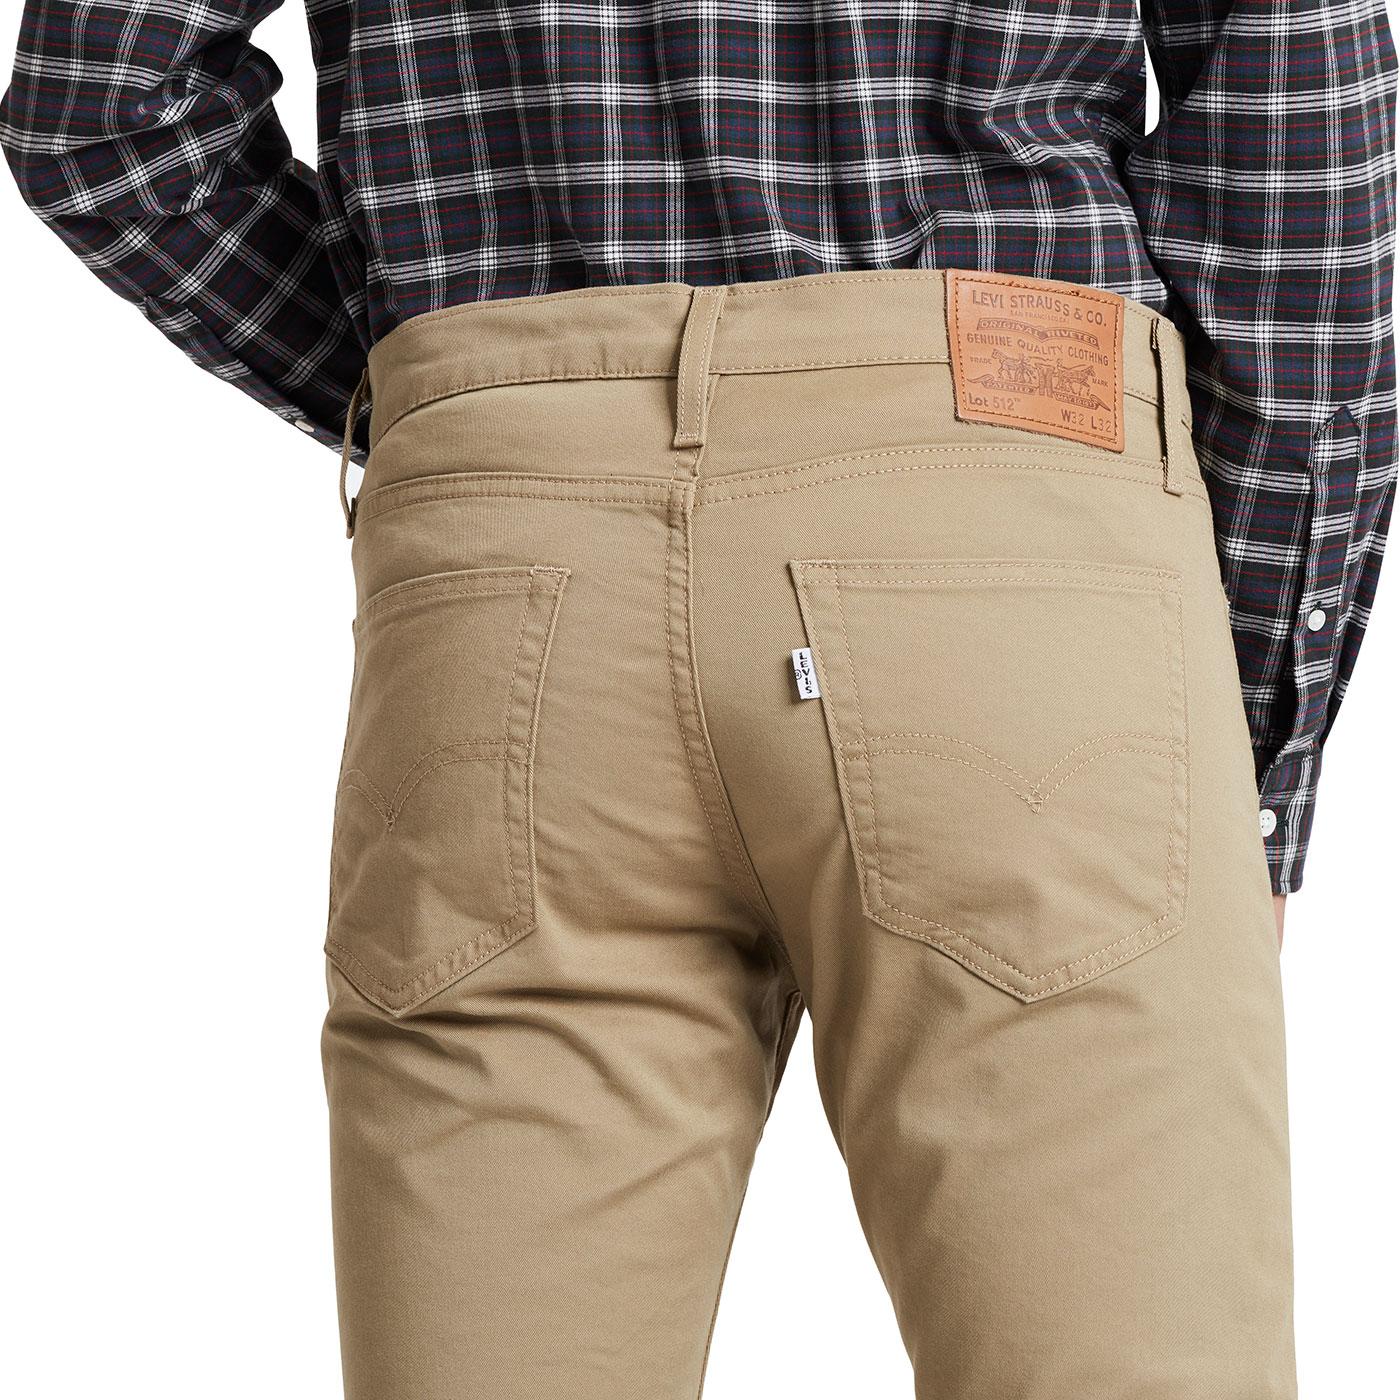 Mod Slim Taper Fit Chinos in Harvest Gold